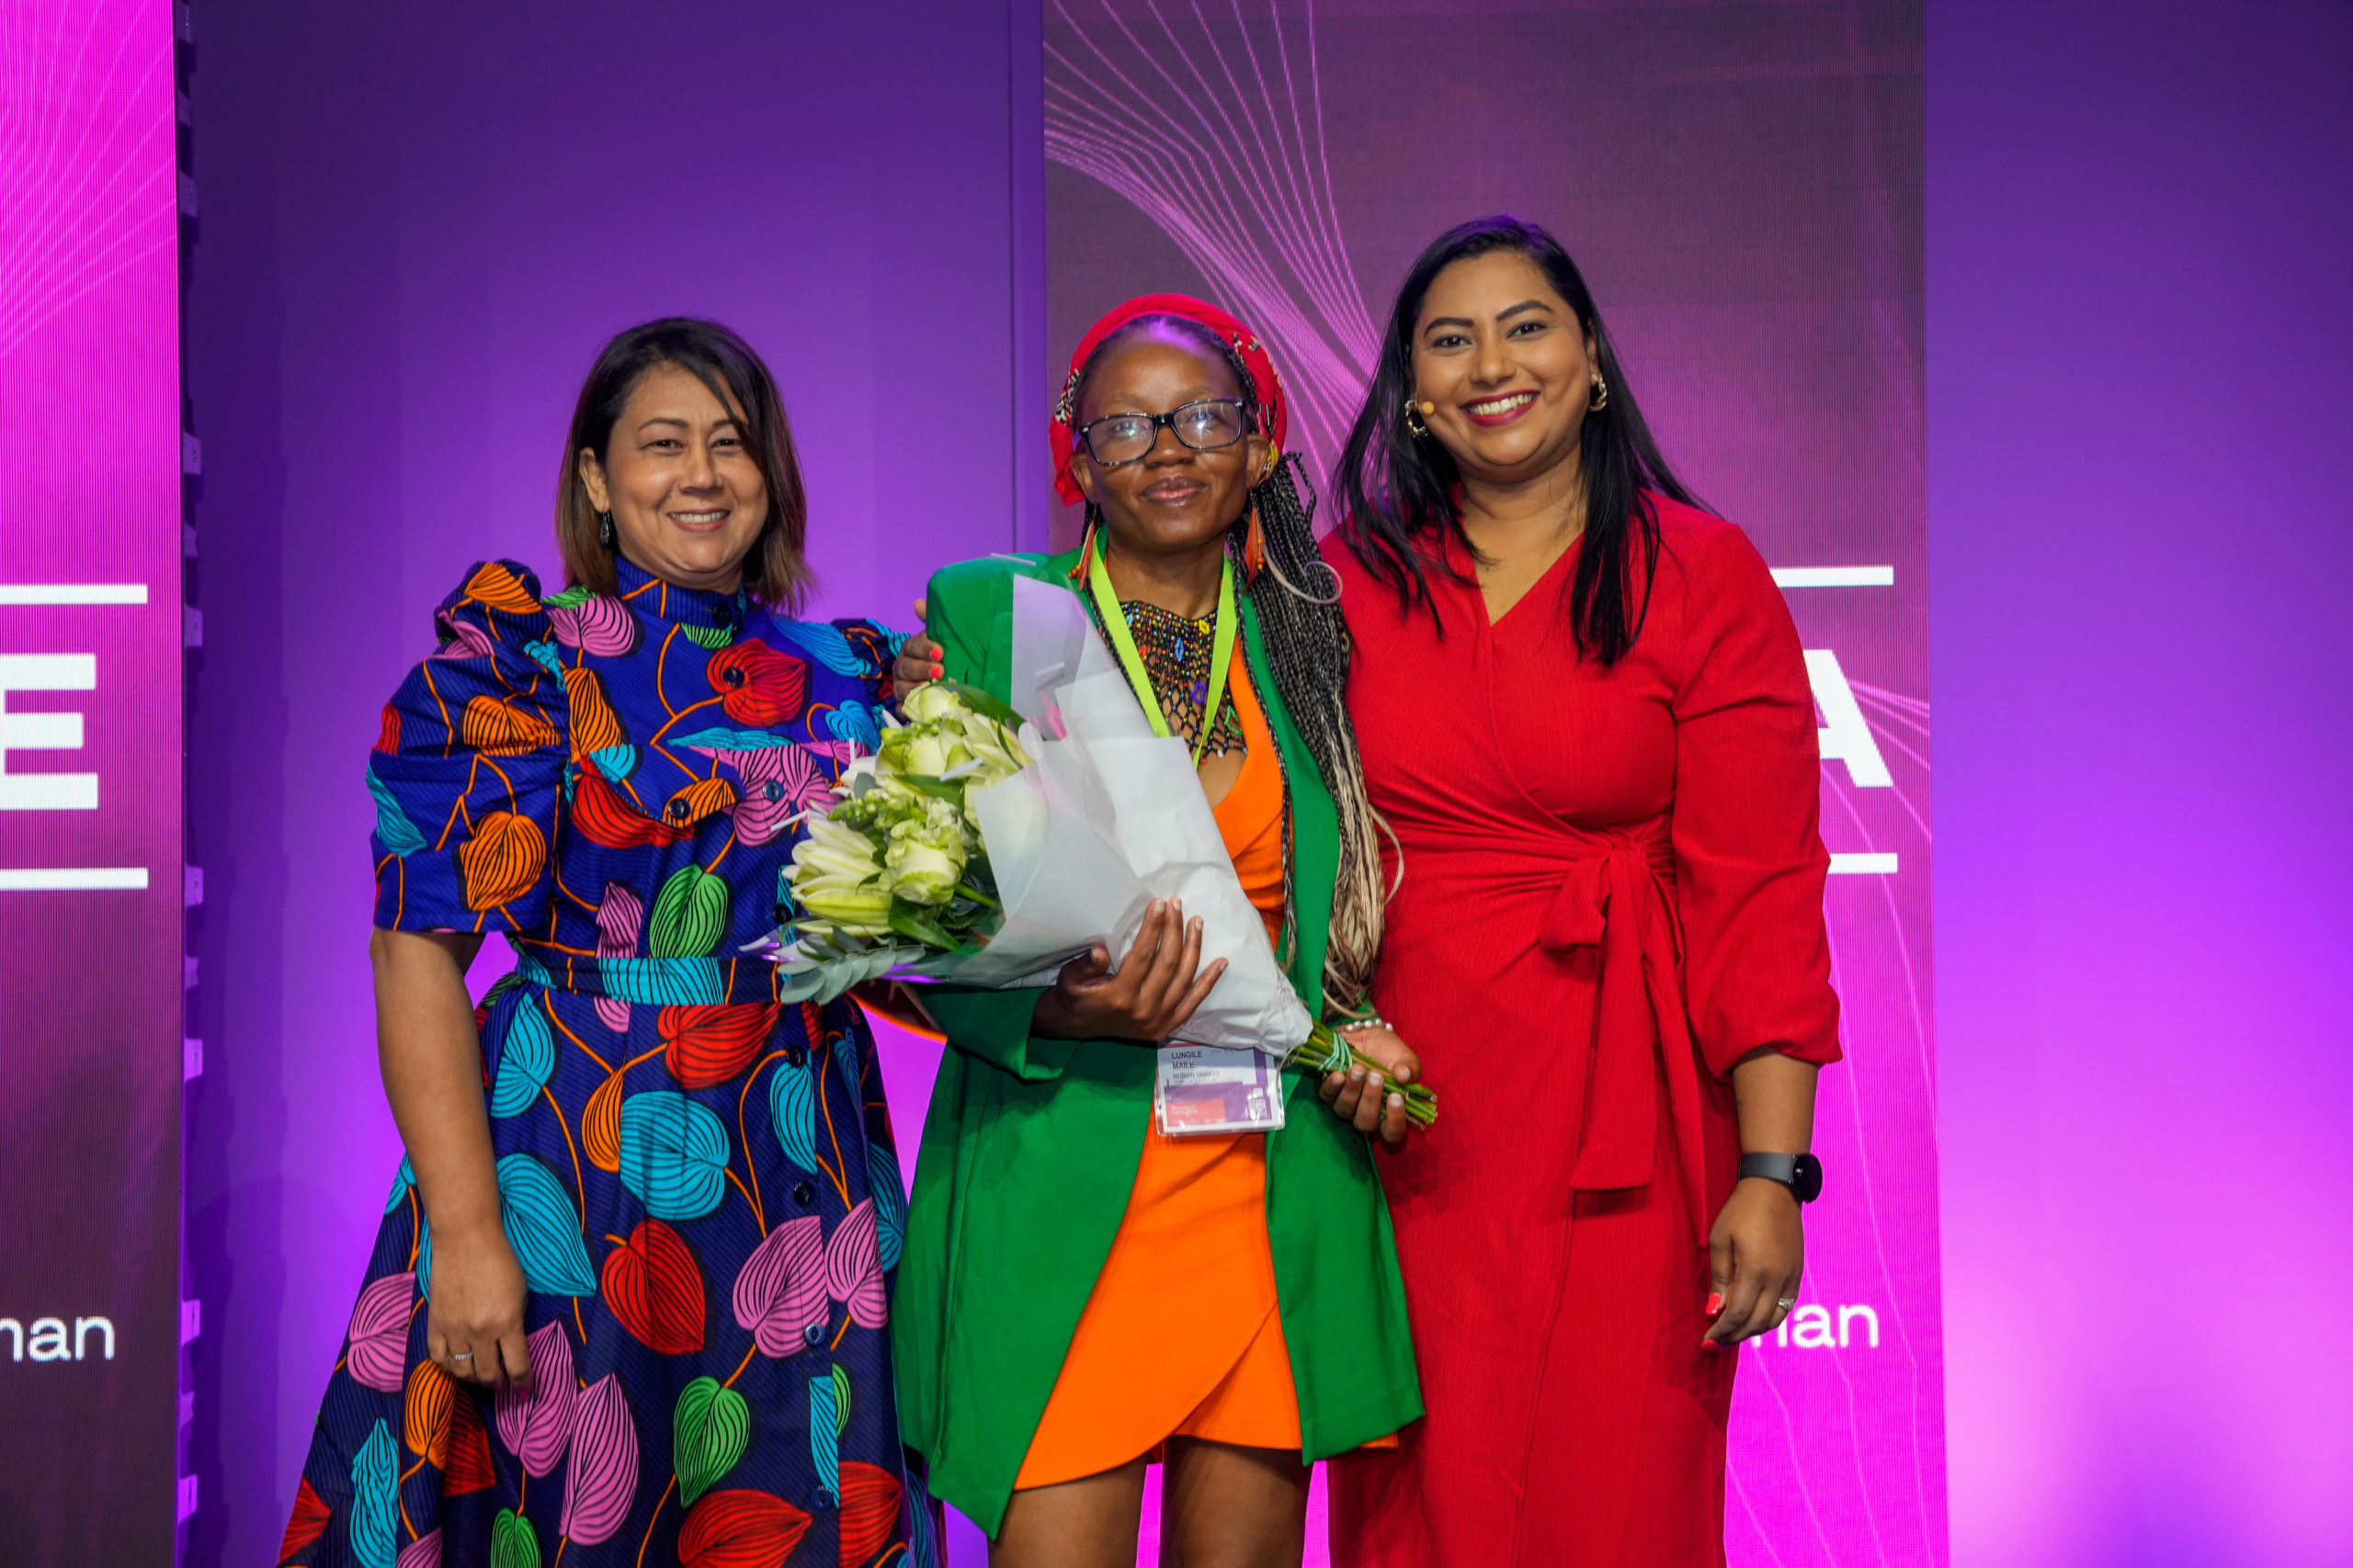 Global Alliance Africa More than a Woman Award Winner - Lungile Maile